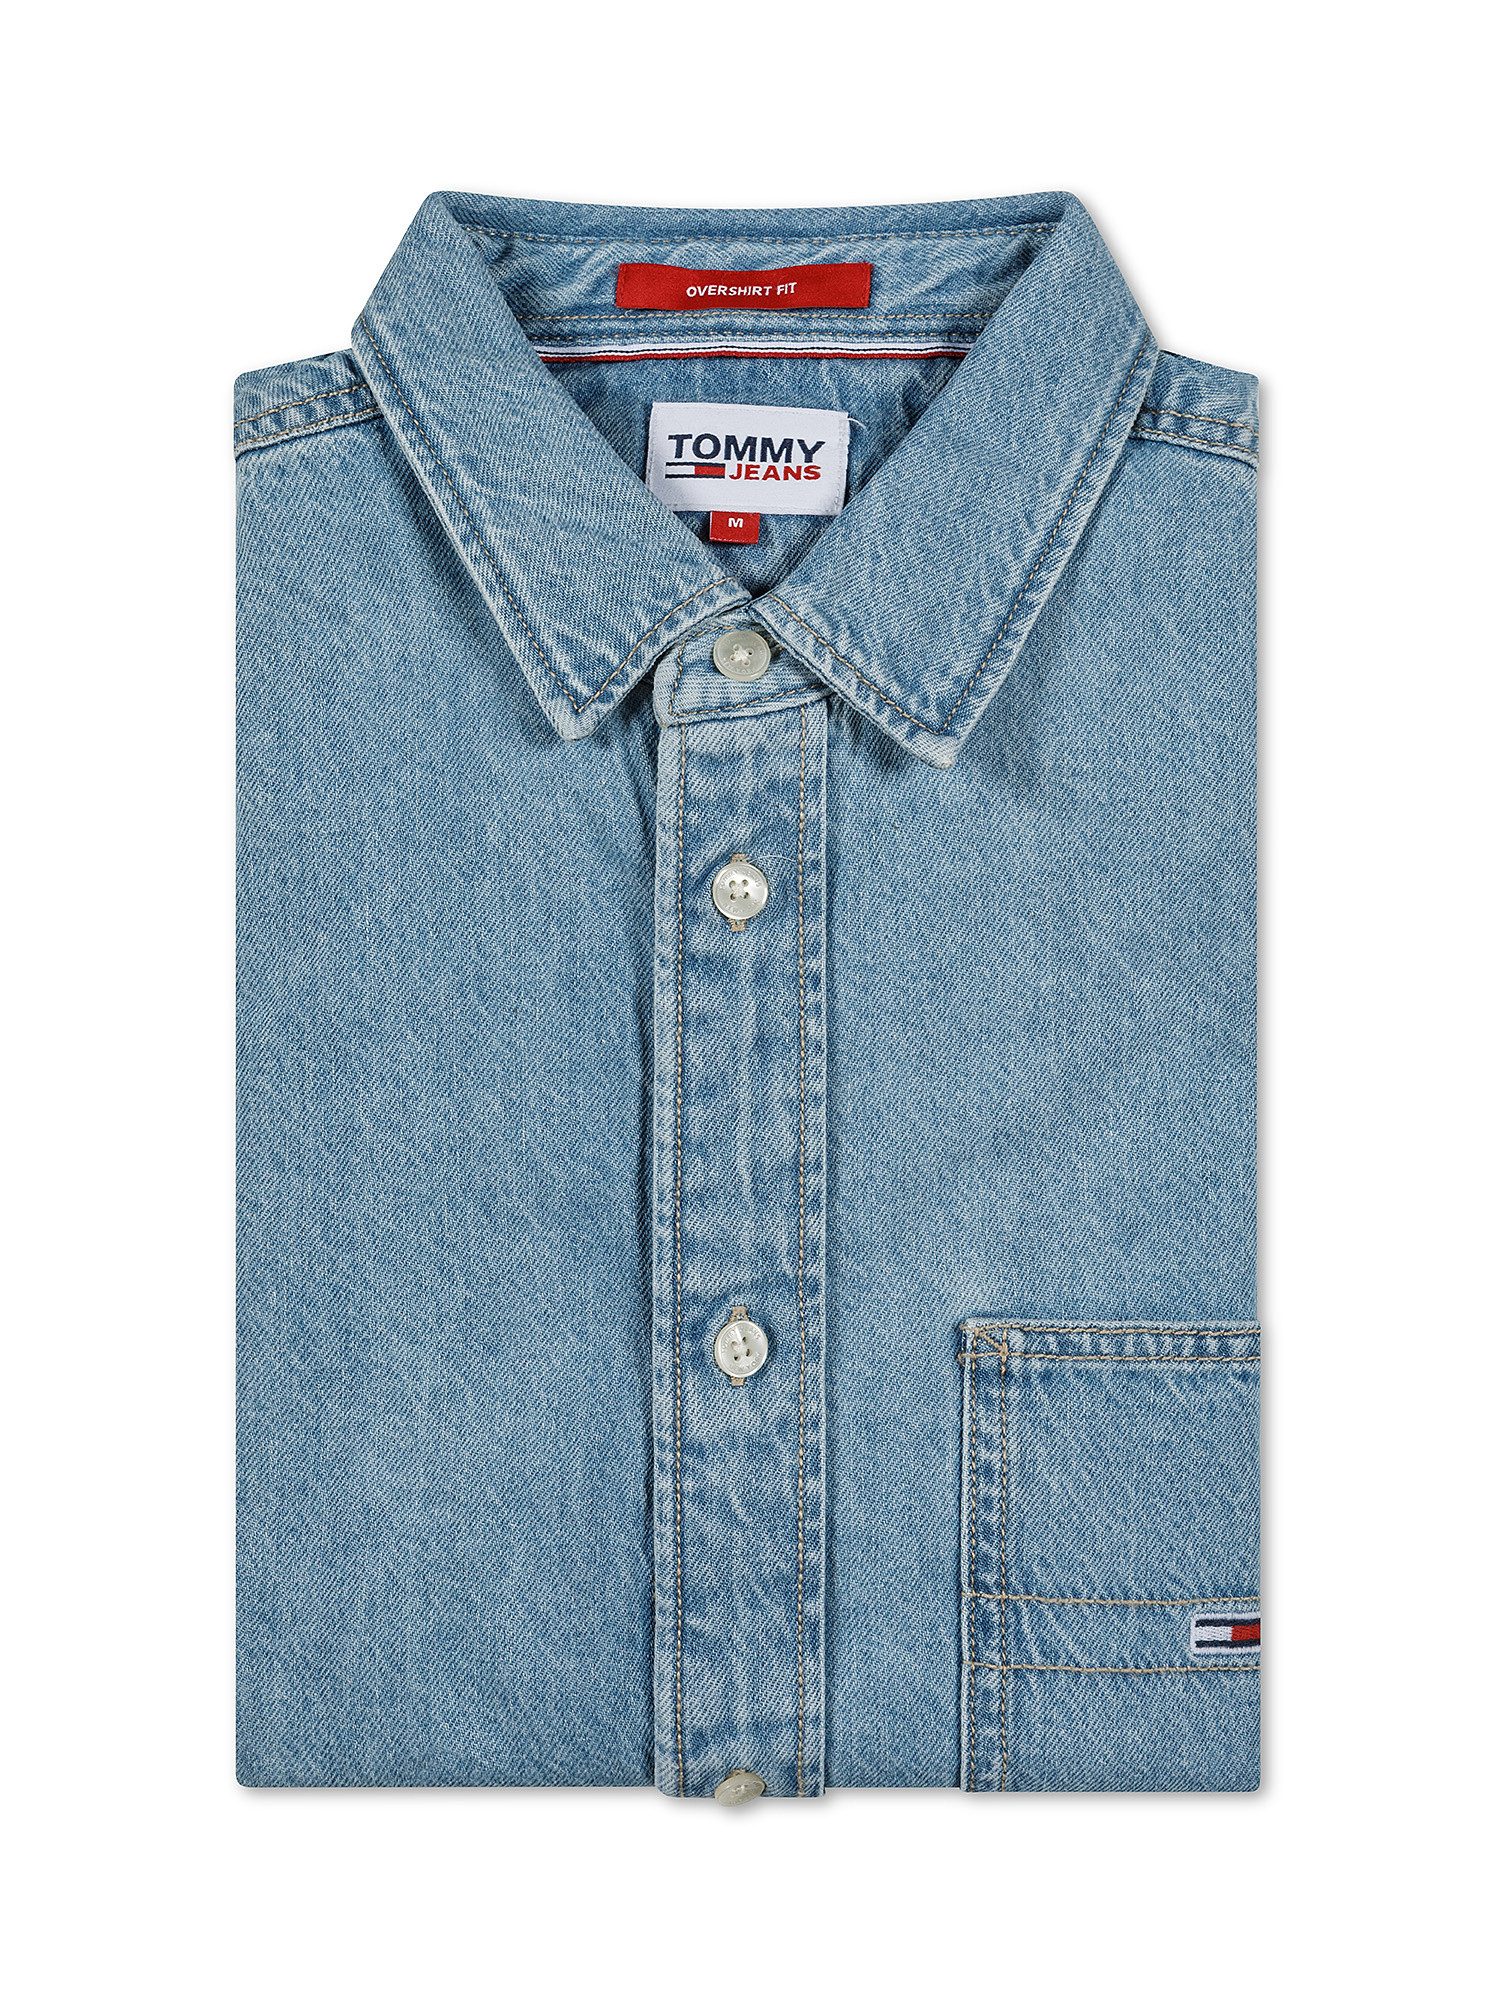 Tommy Jeans - Camicia in cotone con logo, Denim, large image number 2